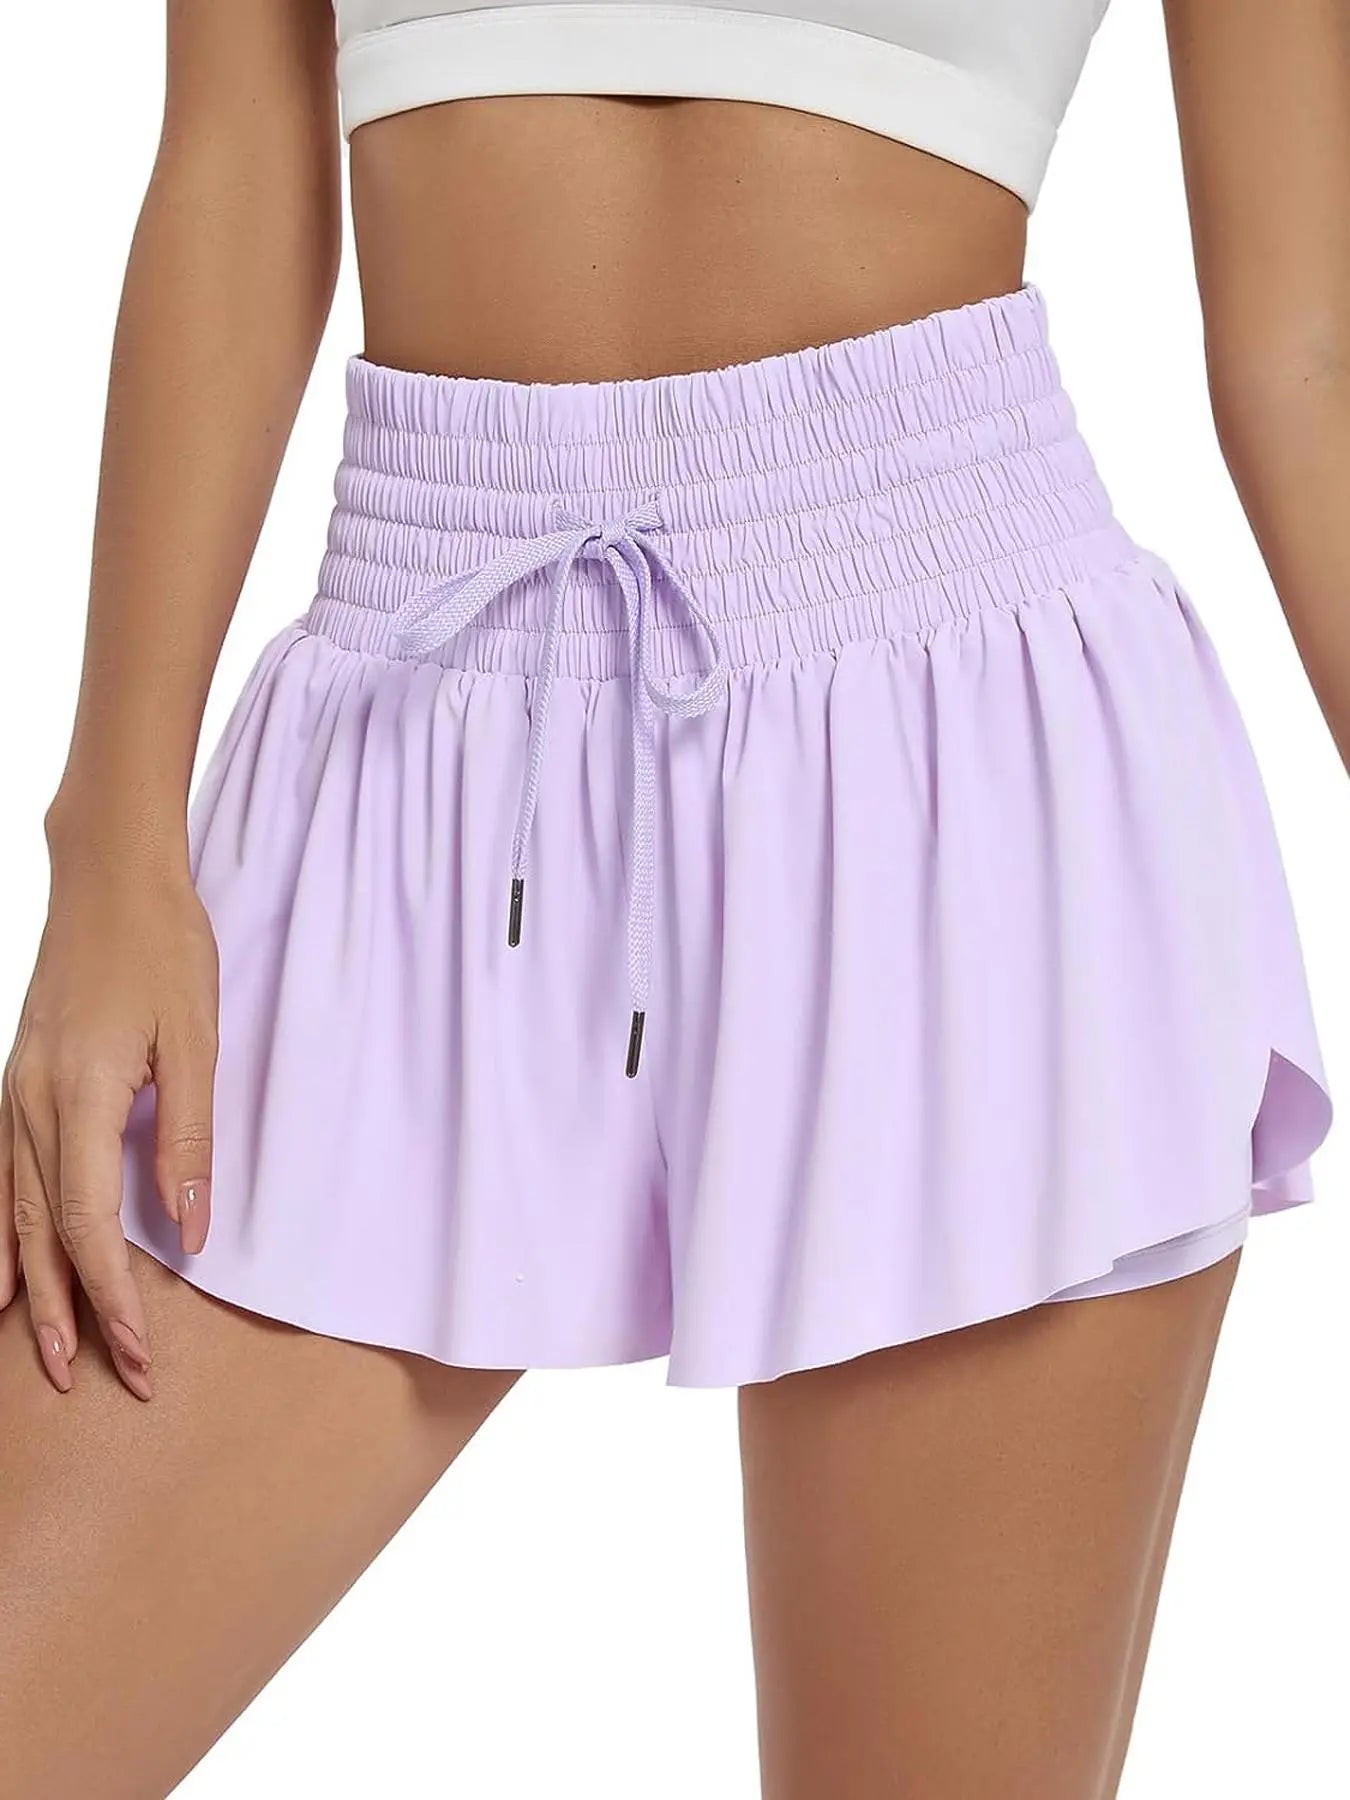 Women'S 2 in 1 Drawstring Waist Sports Shorts, Sporty Shirred Pocket Shorts, Summer Gym Outfits, Sport & Outdoor Clothing for Yoga Workout Running